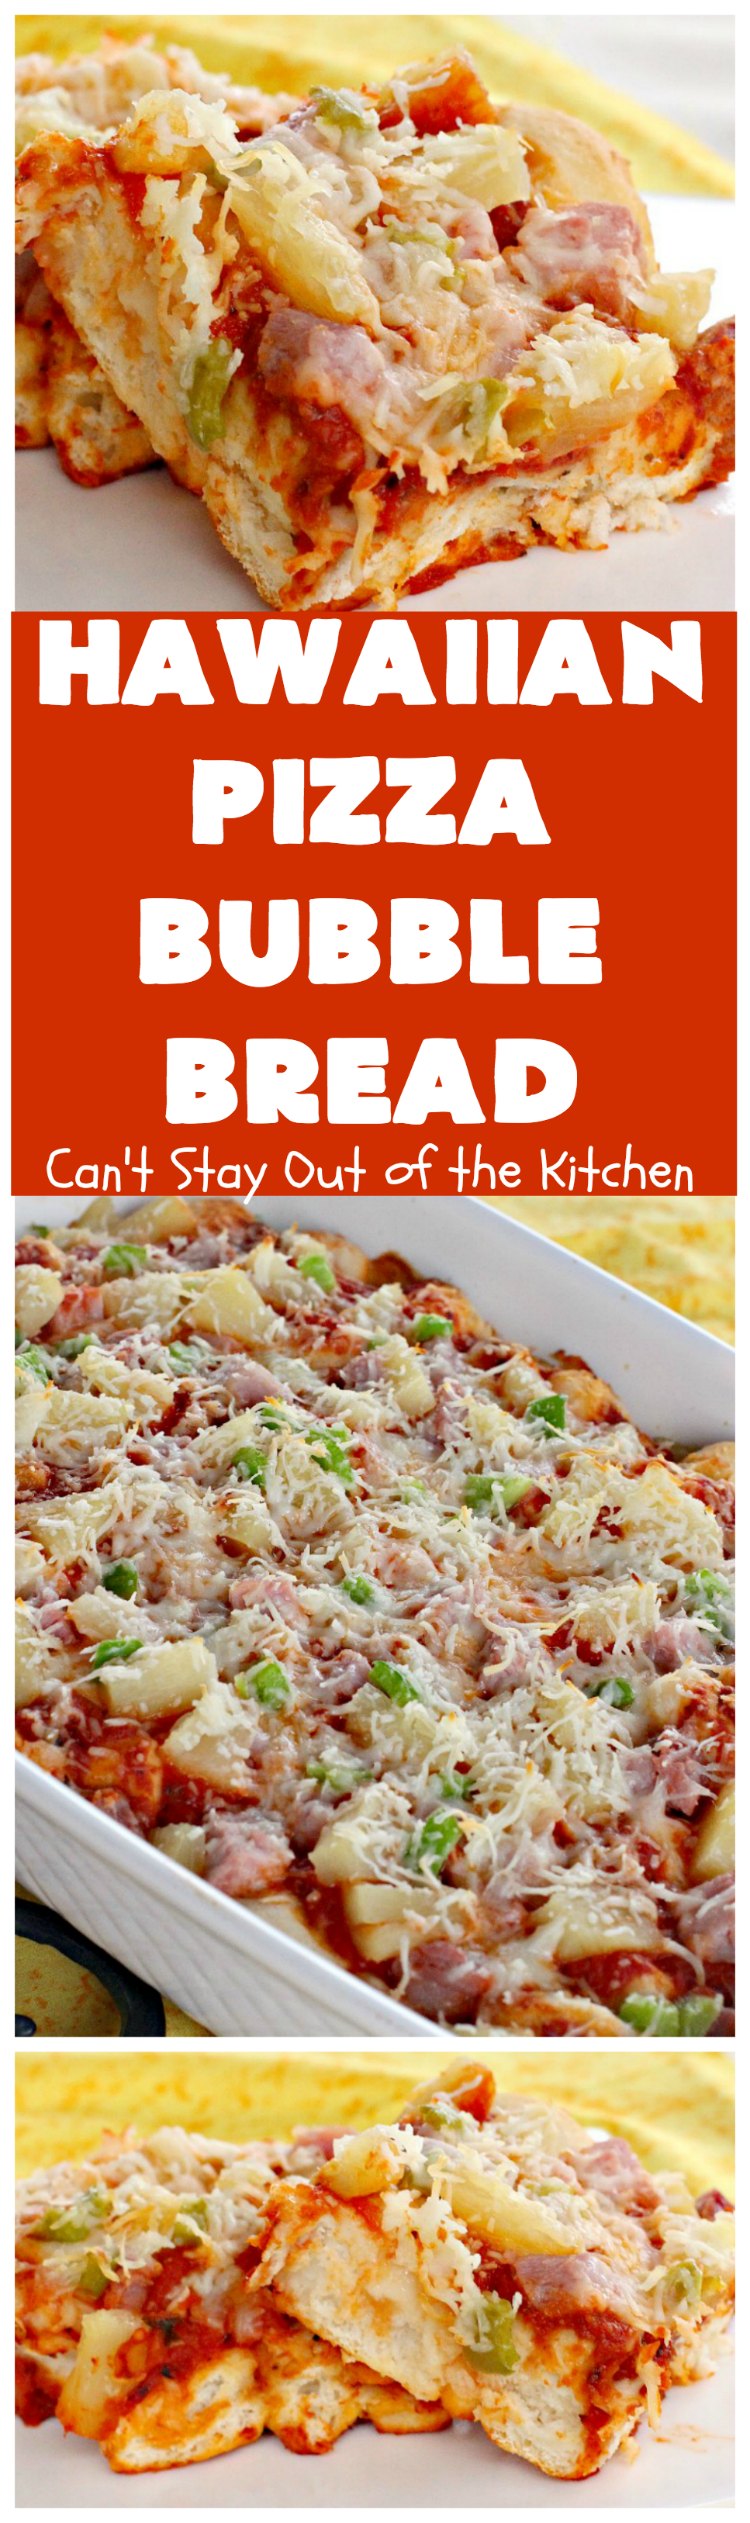 Hawaiian Pizza Bubble Bread | Can't Stay Out of the Kitchen